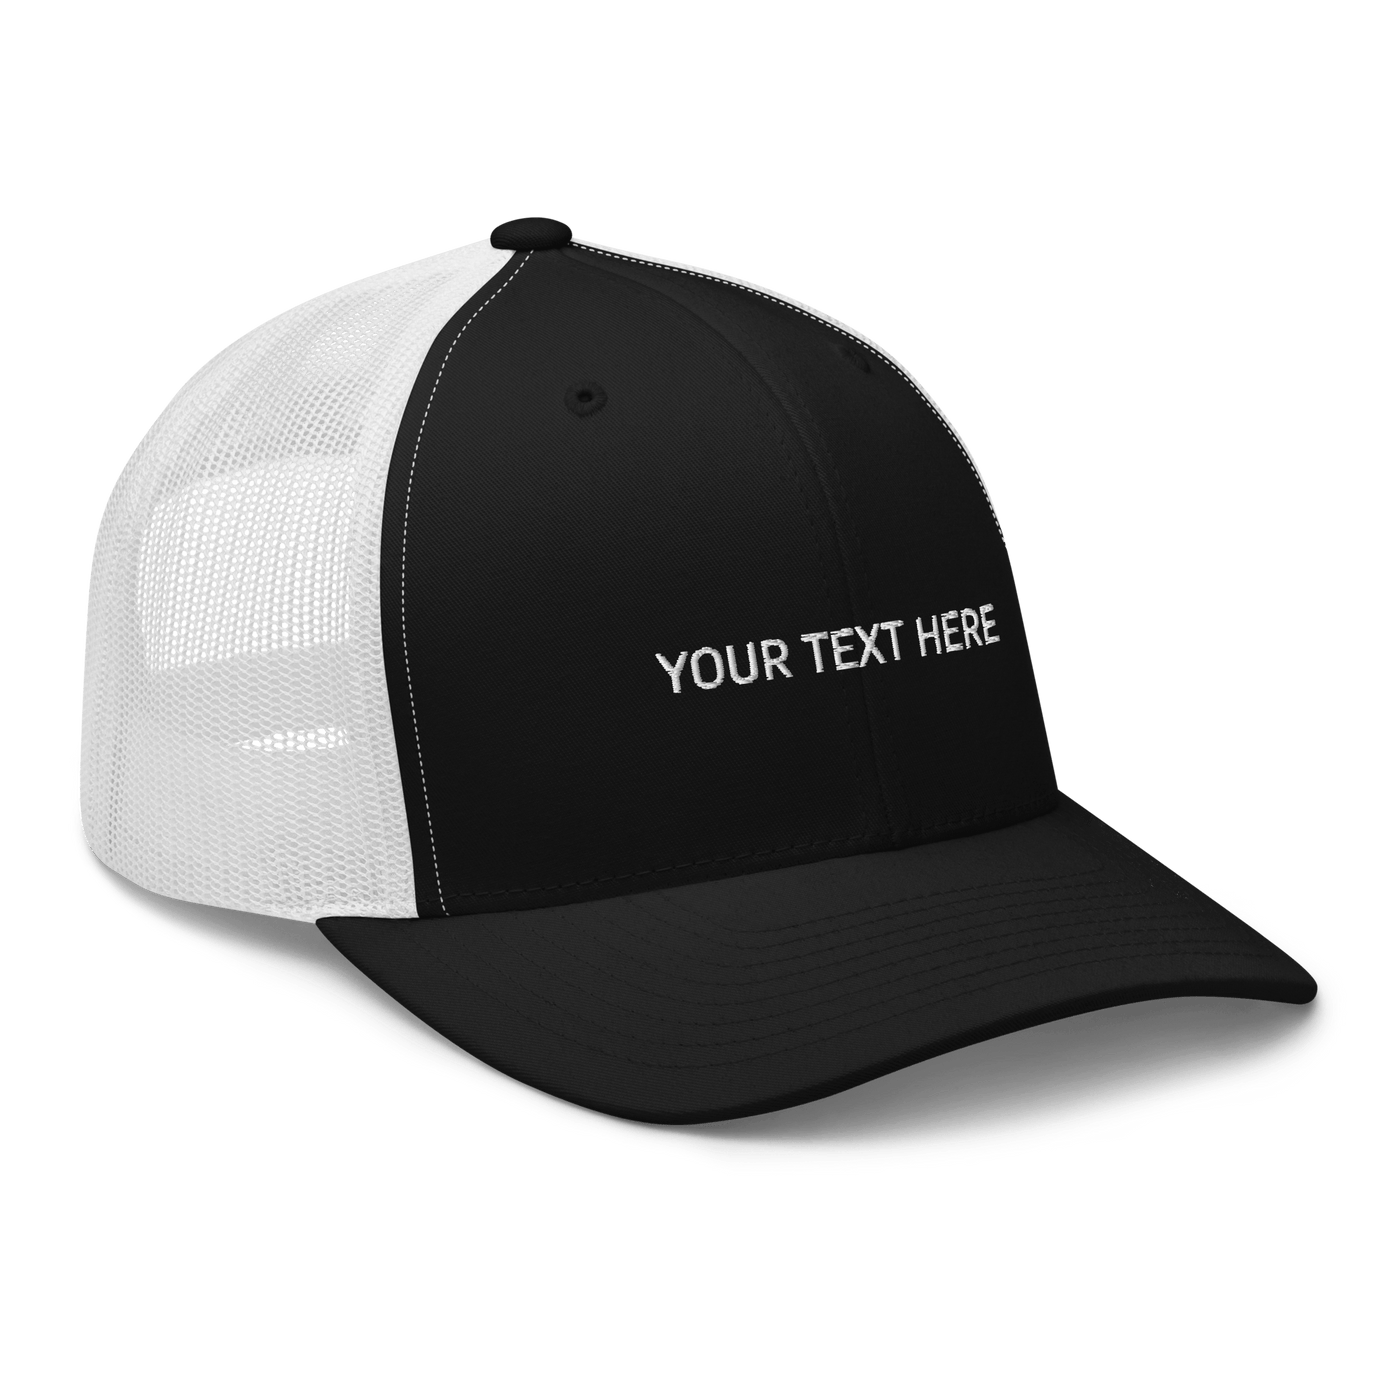 Customize your own Trucker Cap - Black/ White - - Just Another Cap Store